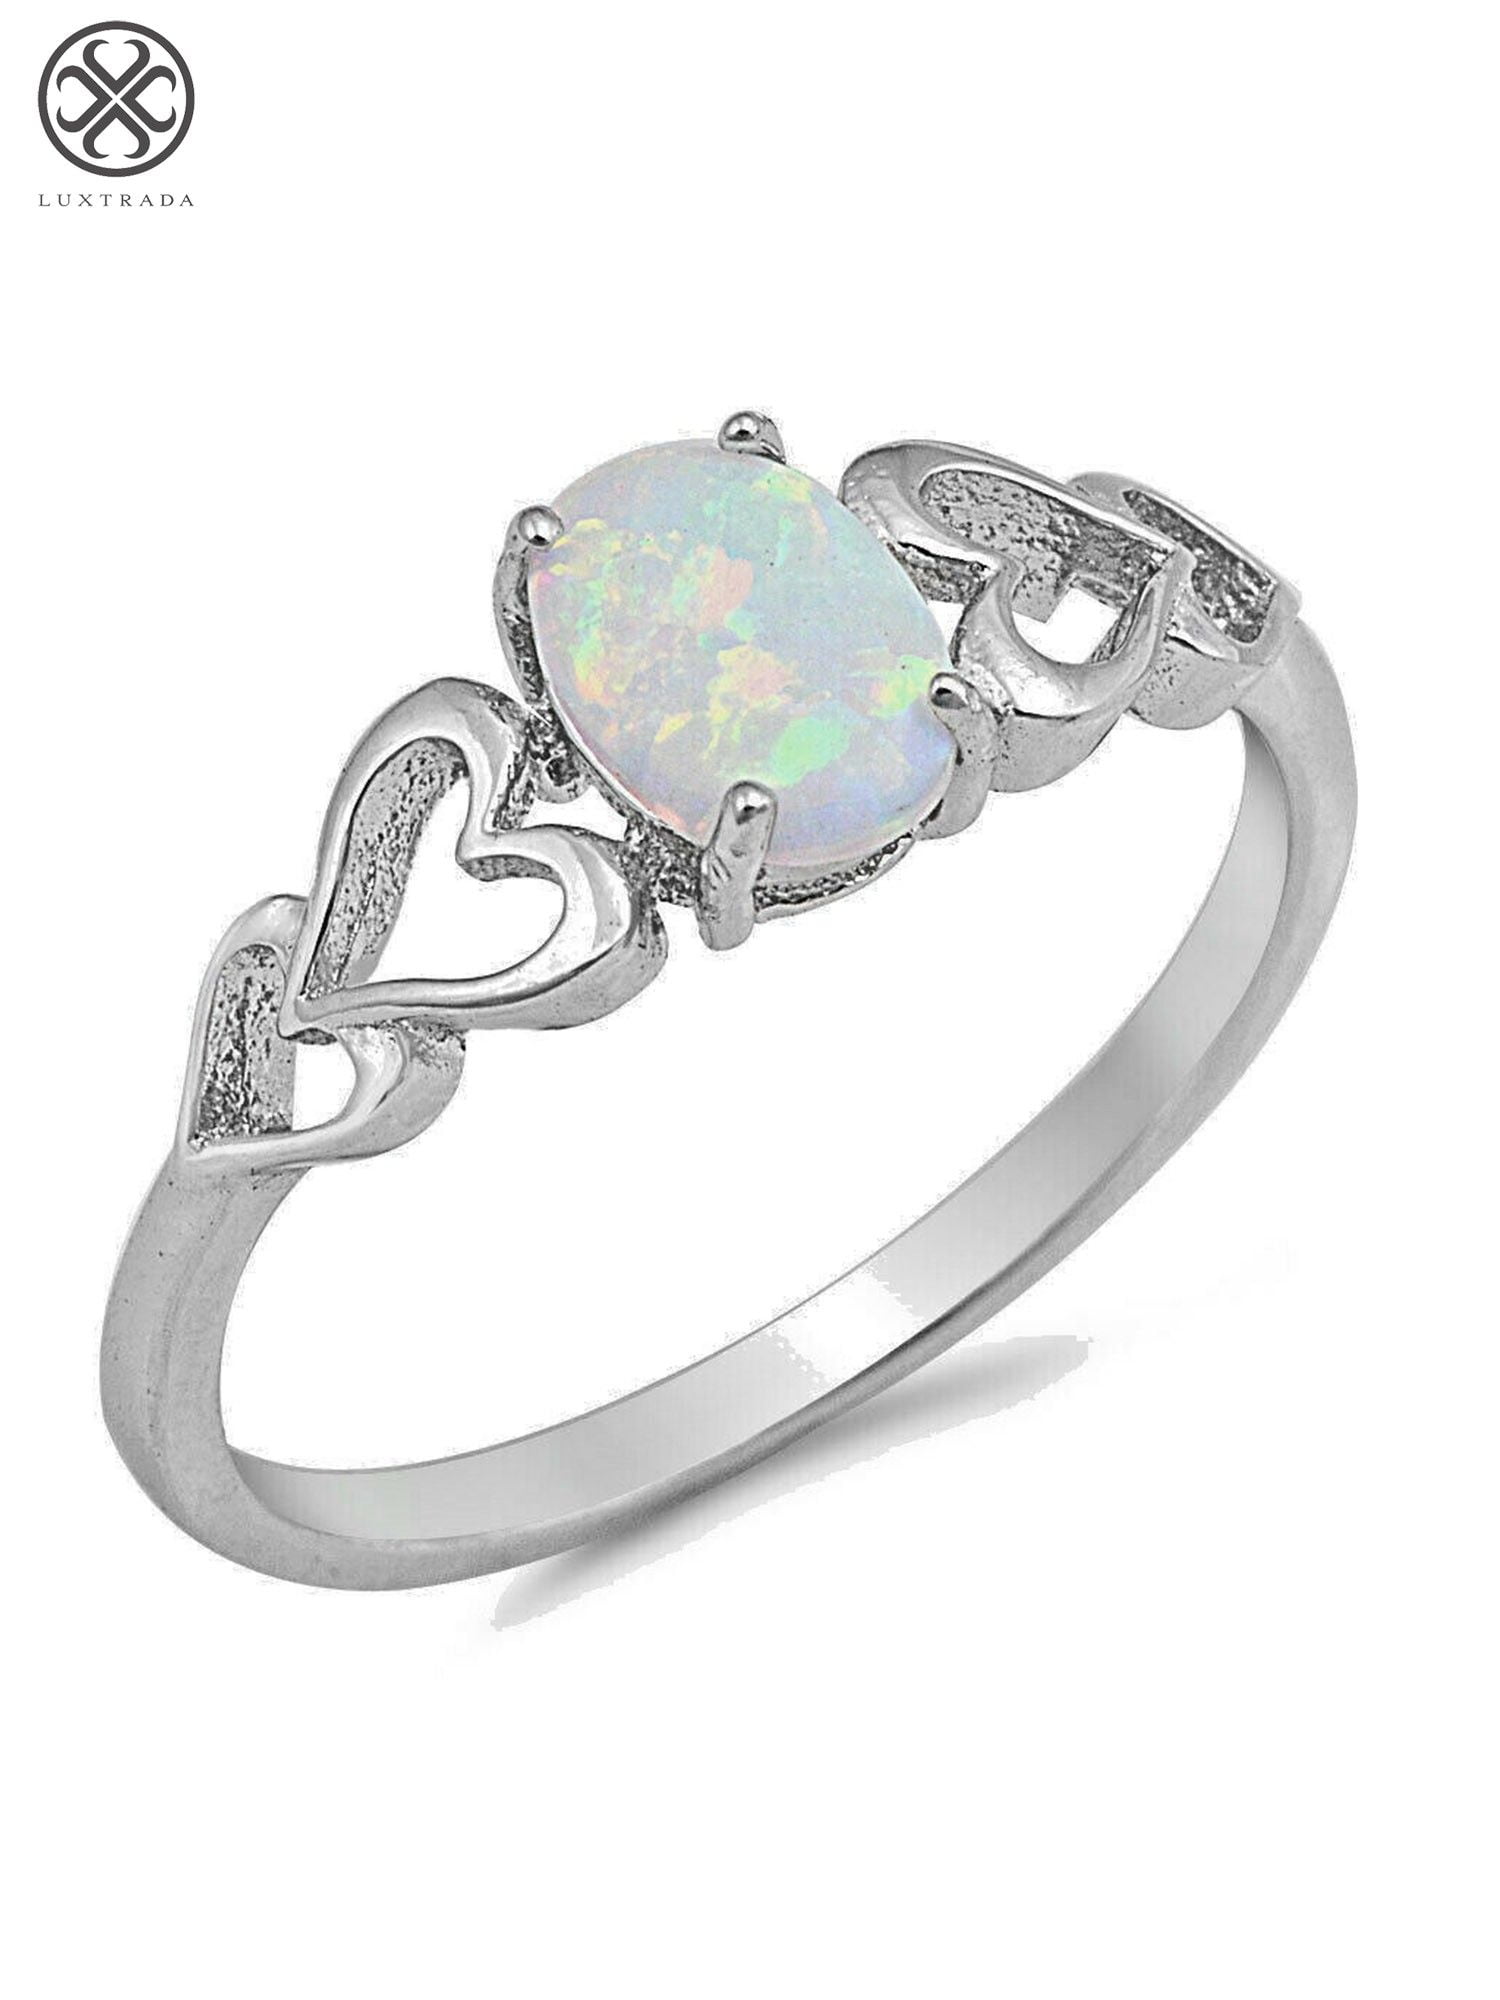 Triple Blue White Pink Lab Opal Ring New .925 Sterling Silver Band Sizes 4-10 